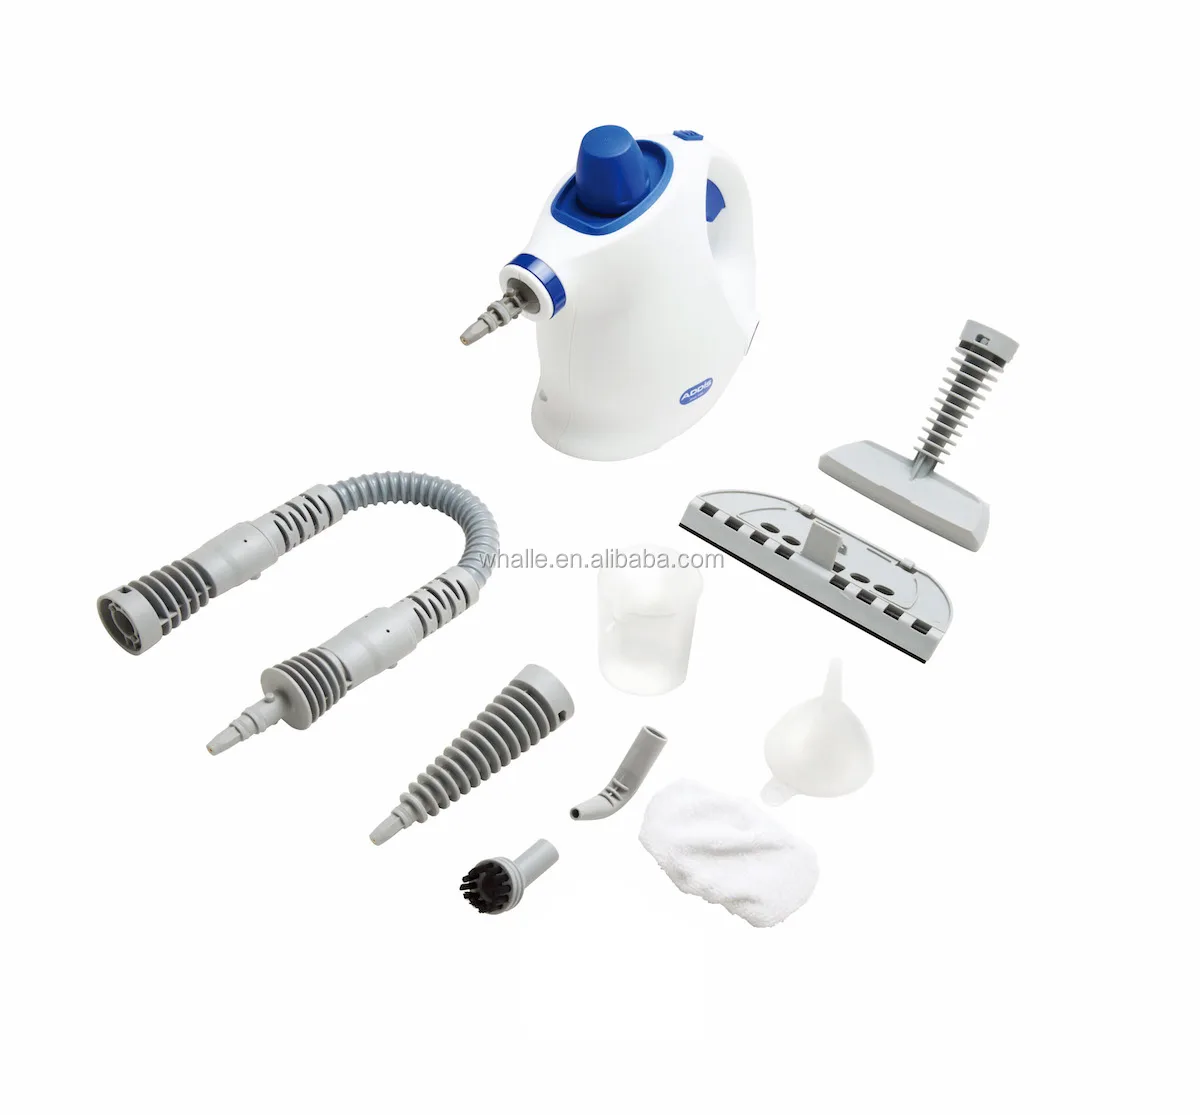 Whalle Steam Cleaner With Mop Handheld Steam Jet Cleaner Portable